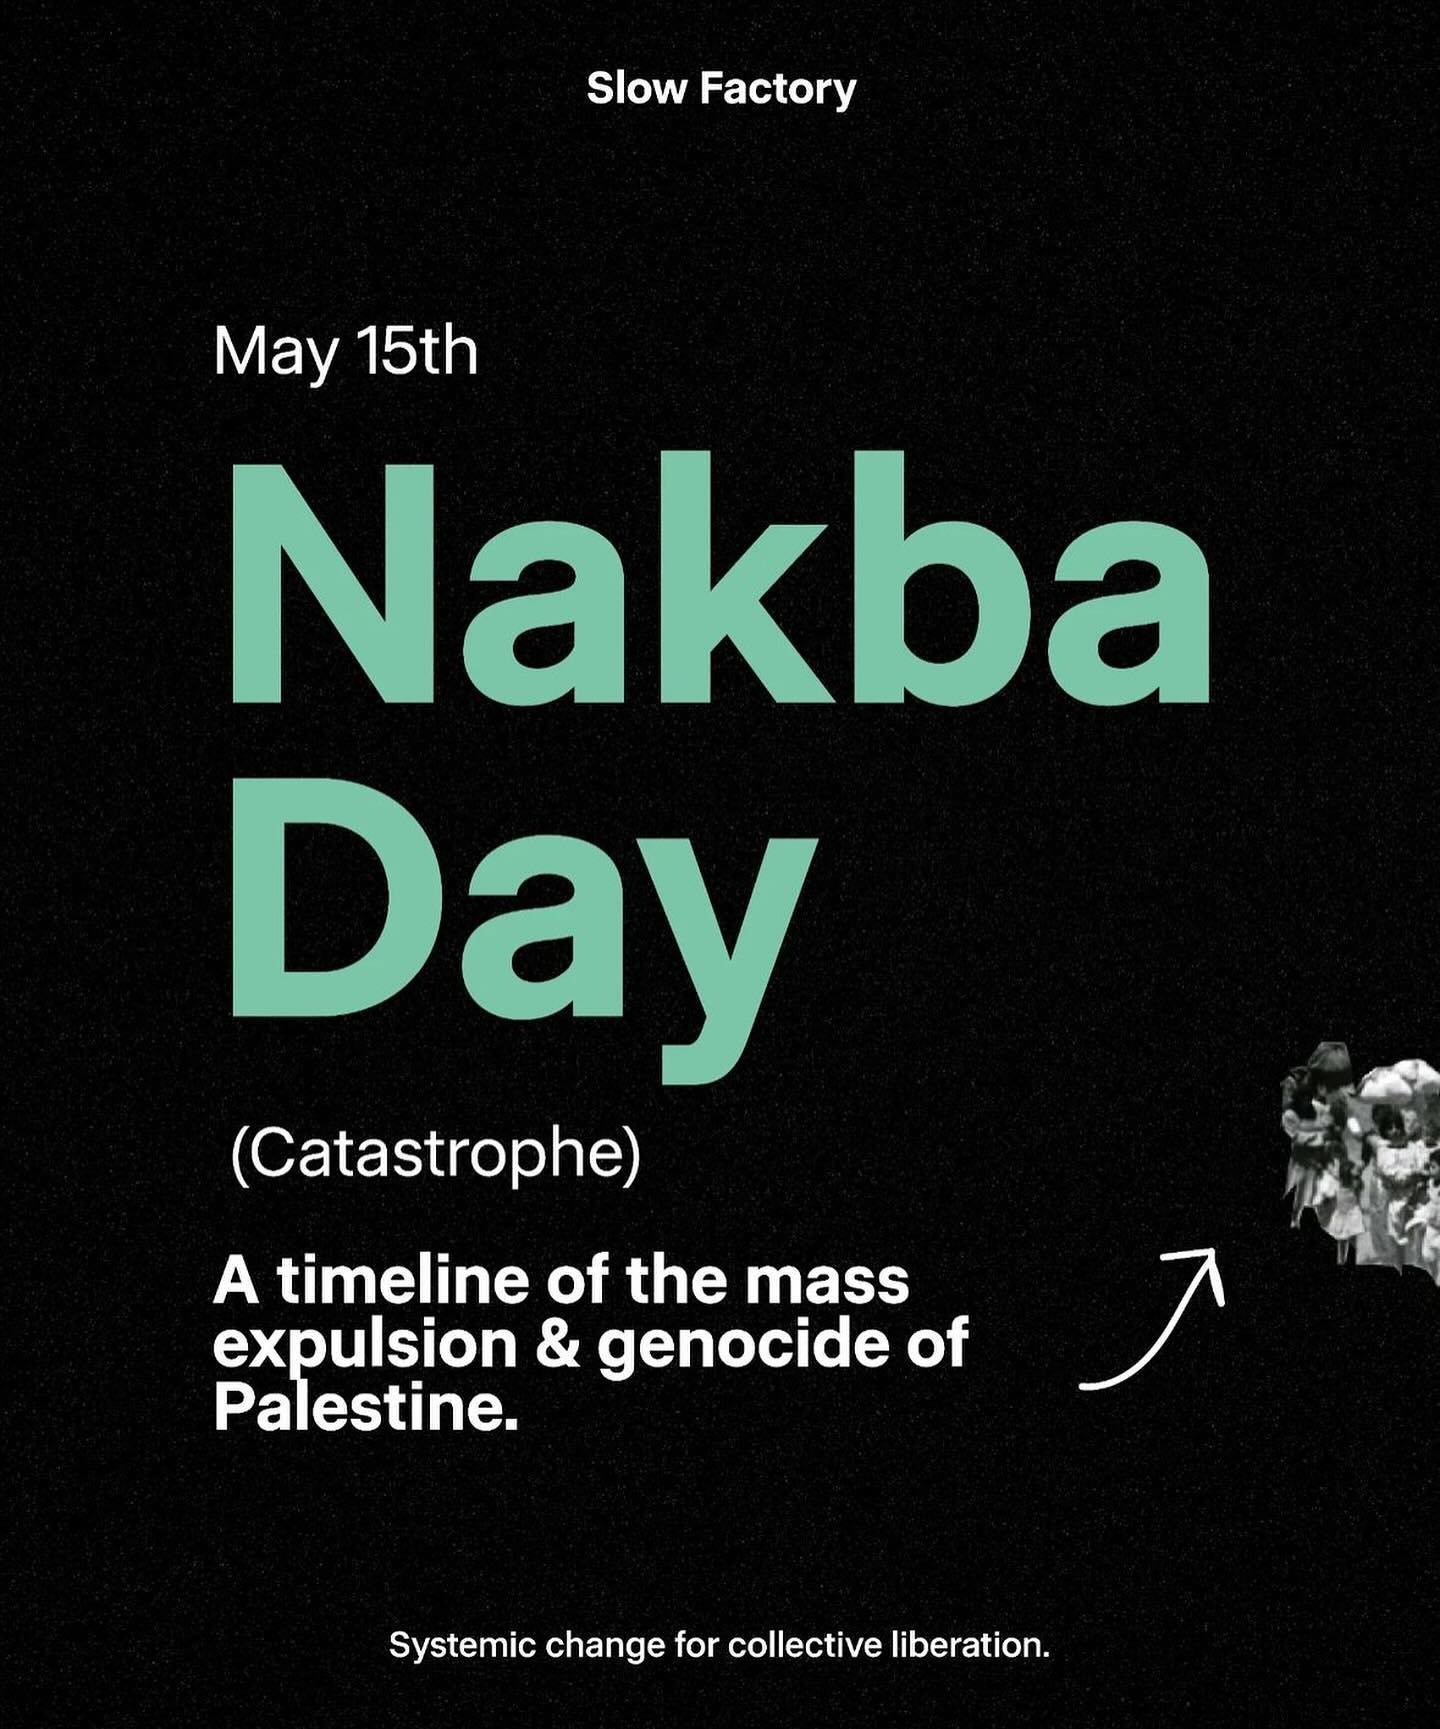 The Nakba never ended 💔

Free the people.
Free the land.
End the genocide.
End the occupation.

Palestine Forever 🕊️🍉🇵🇸

@theslowfactory #nakba #freepalestine